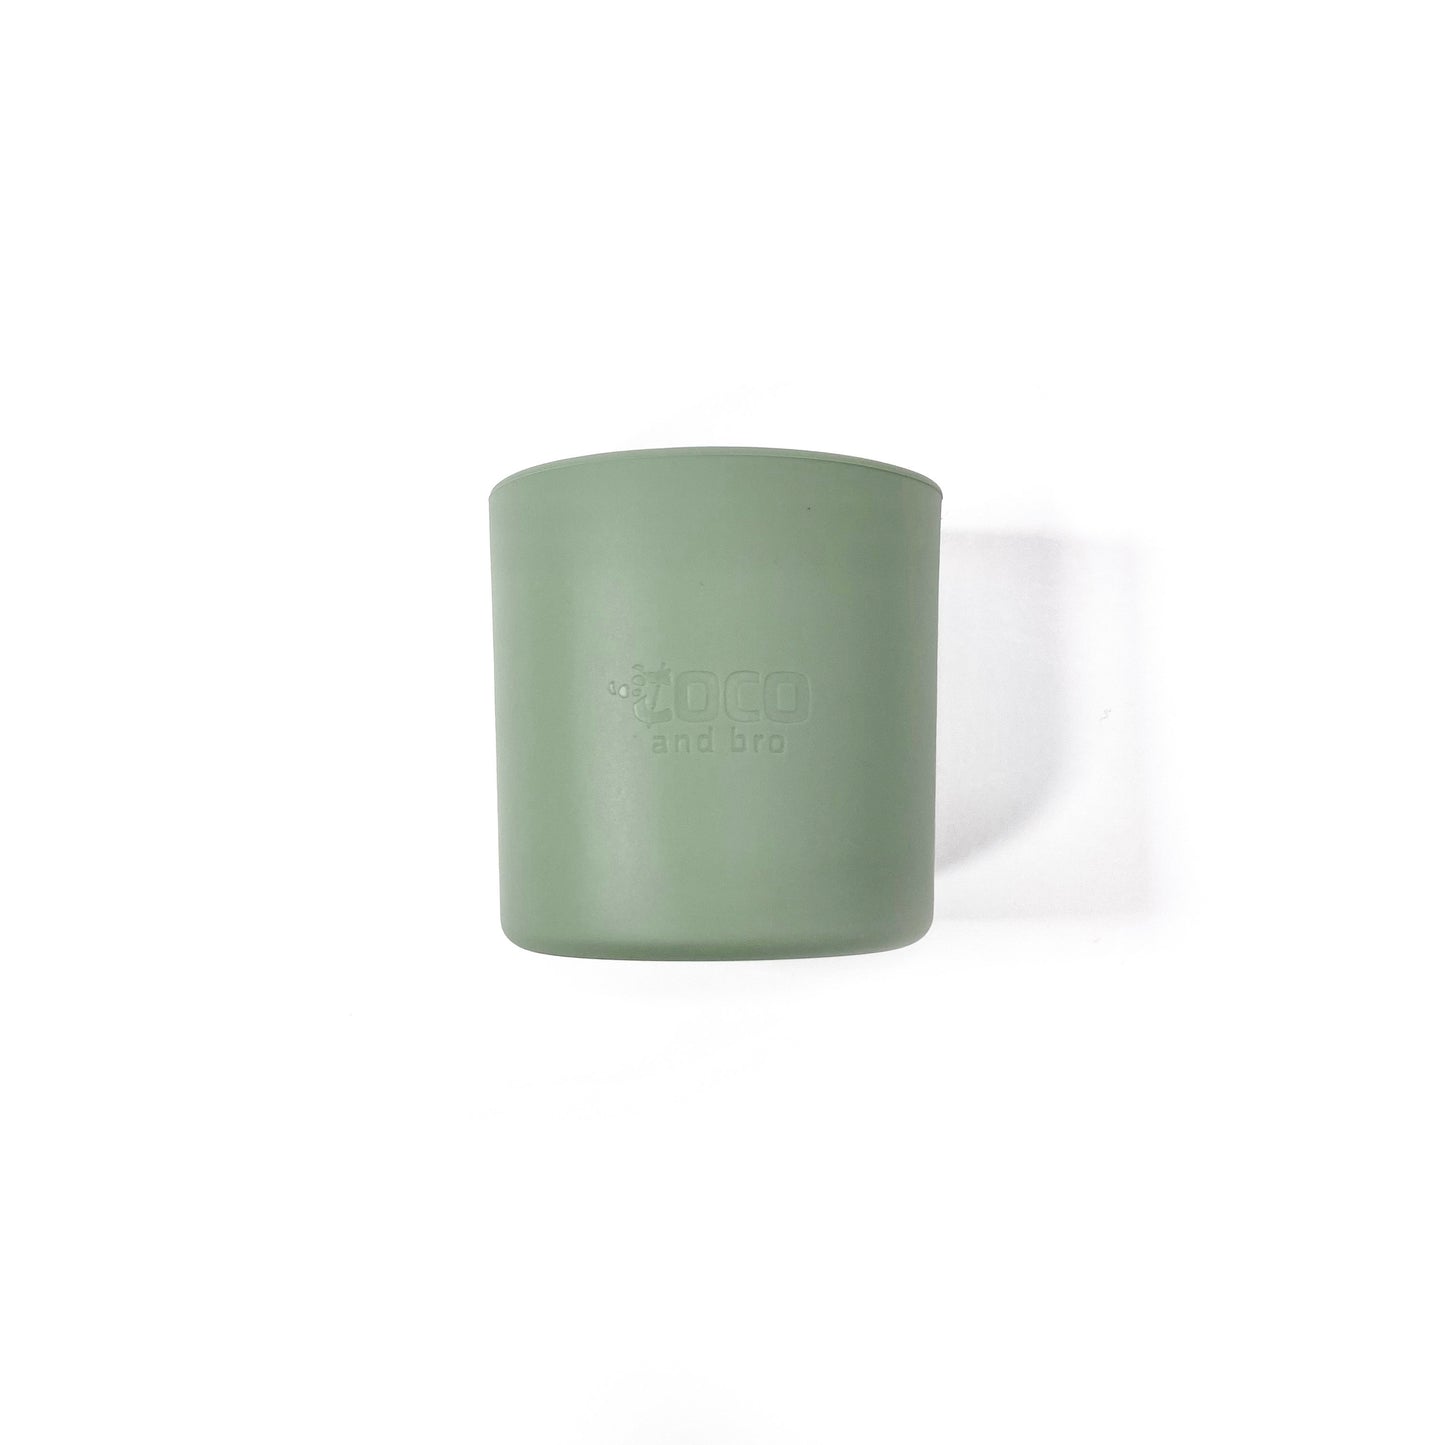 A forest green silicone children’s drinking cup. Side view.